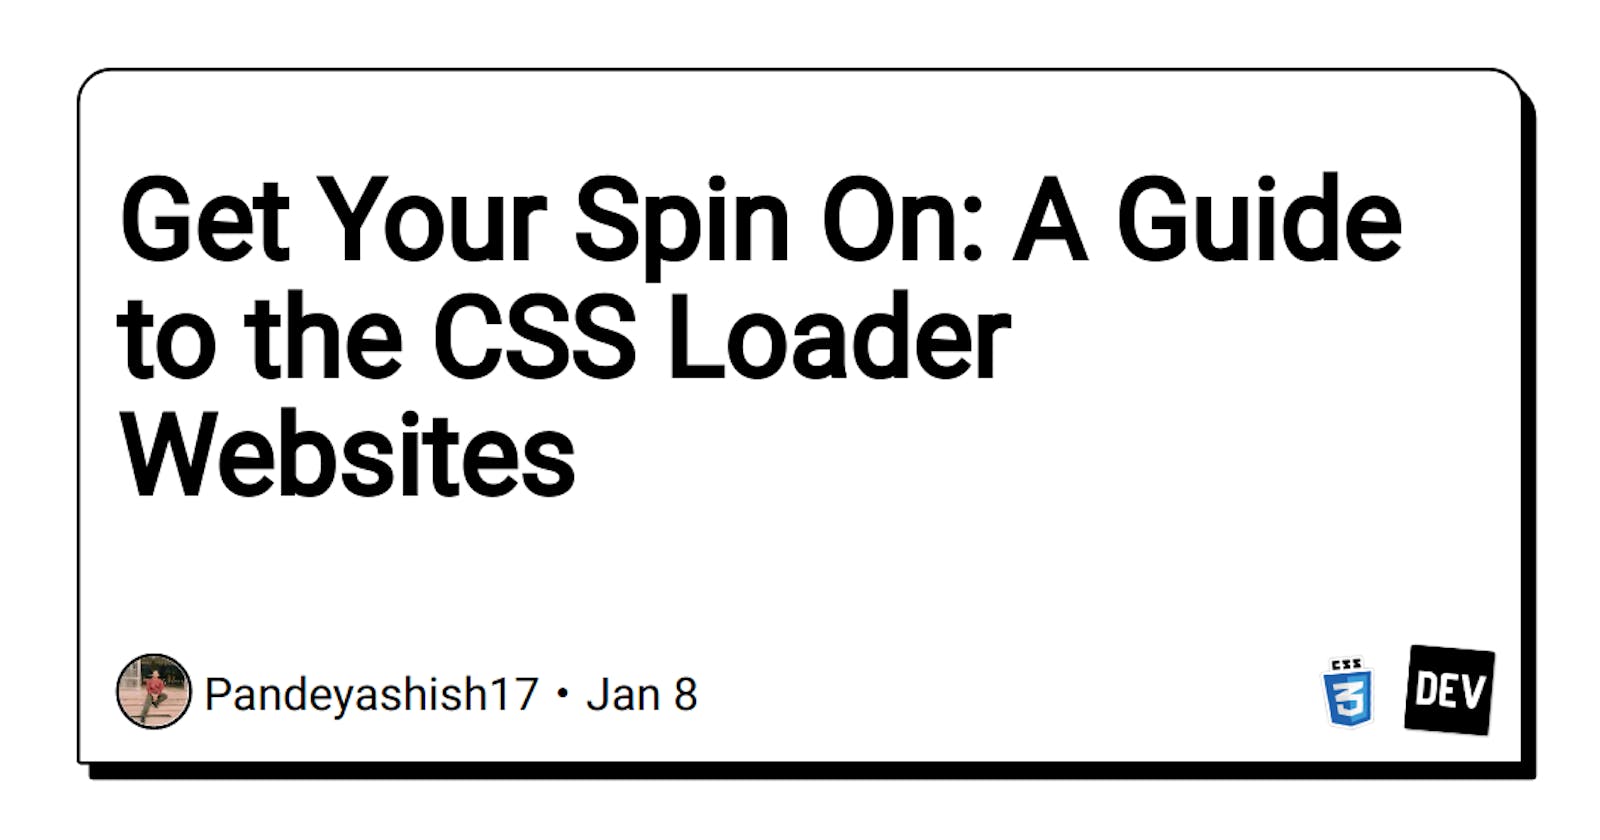 Get Your Spin On: A Guide to the CSS Loader Websites